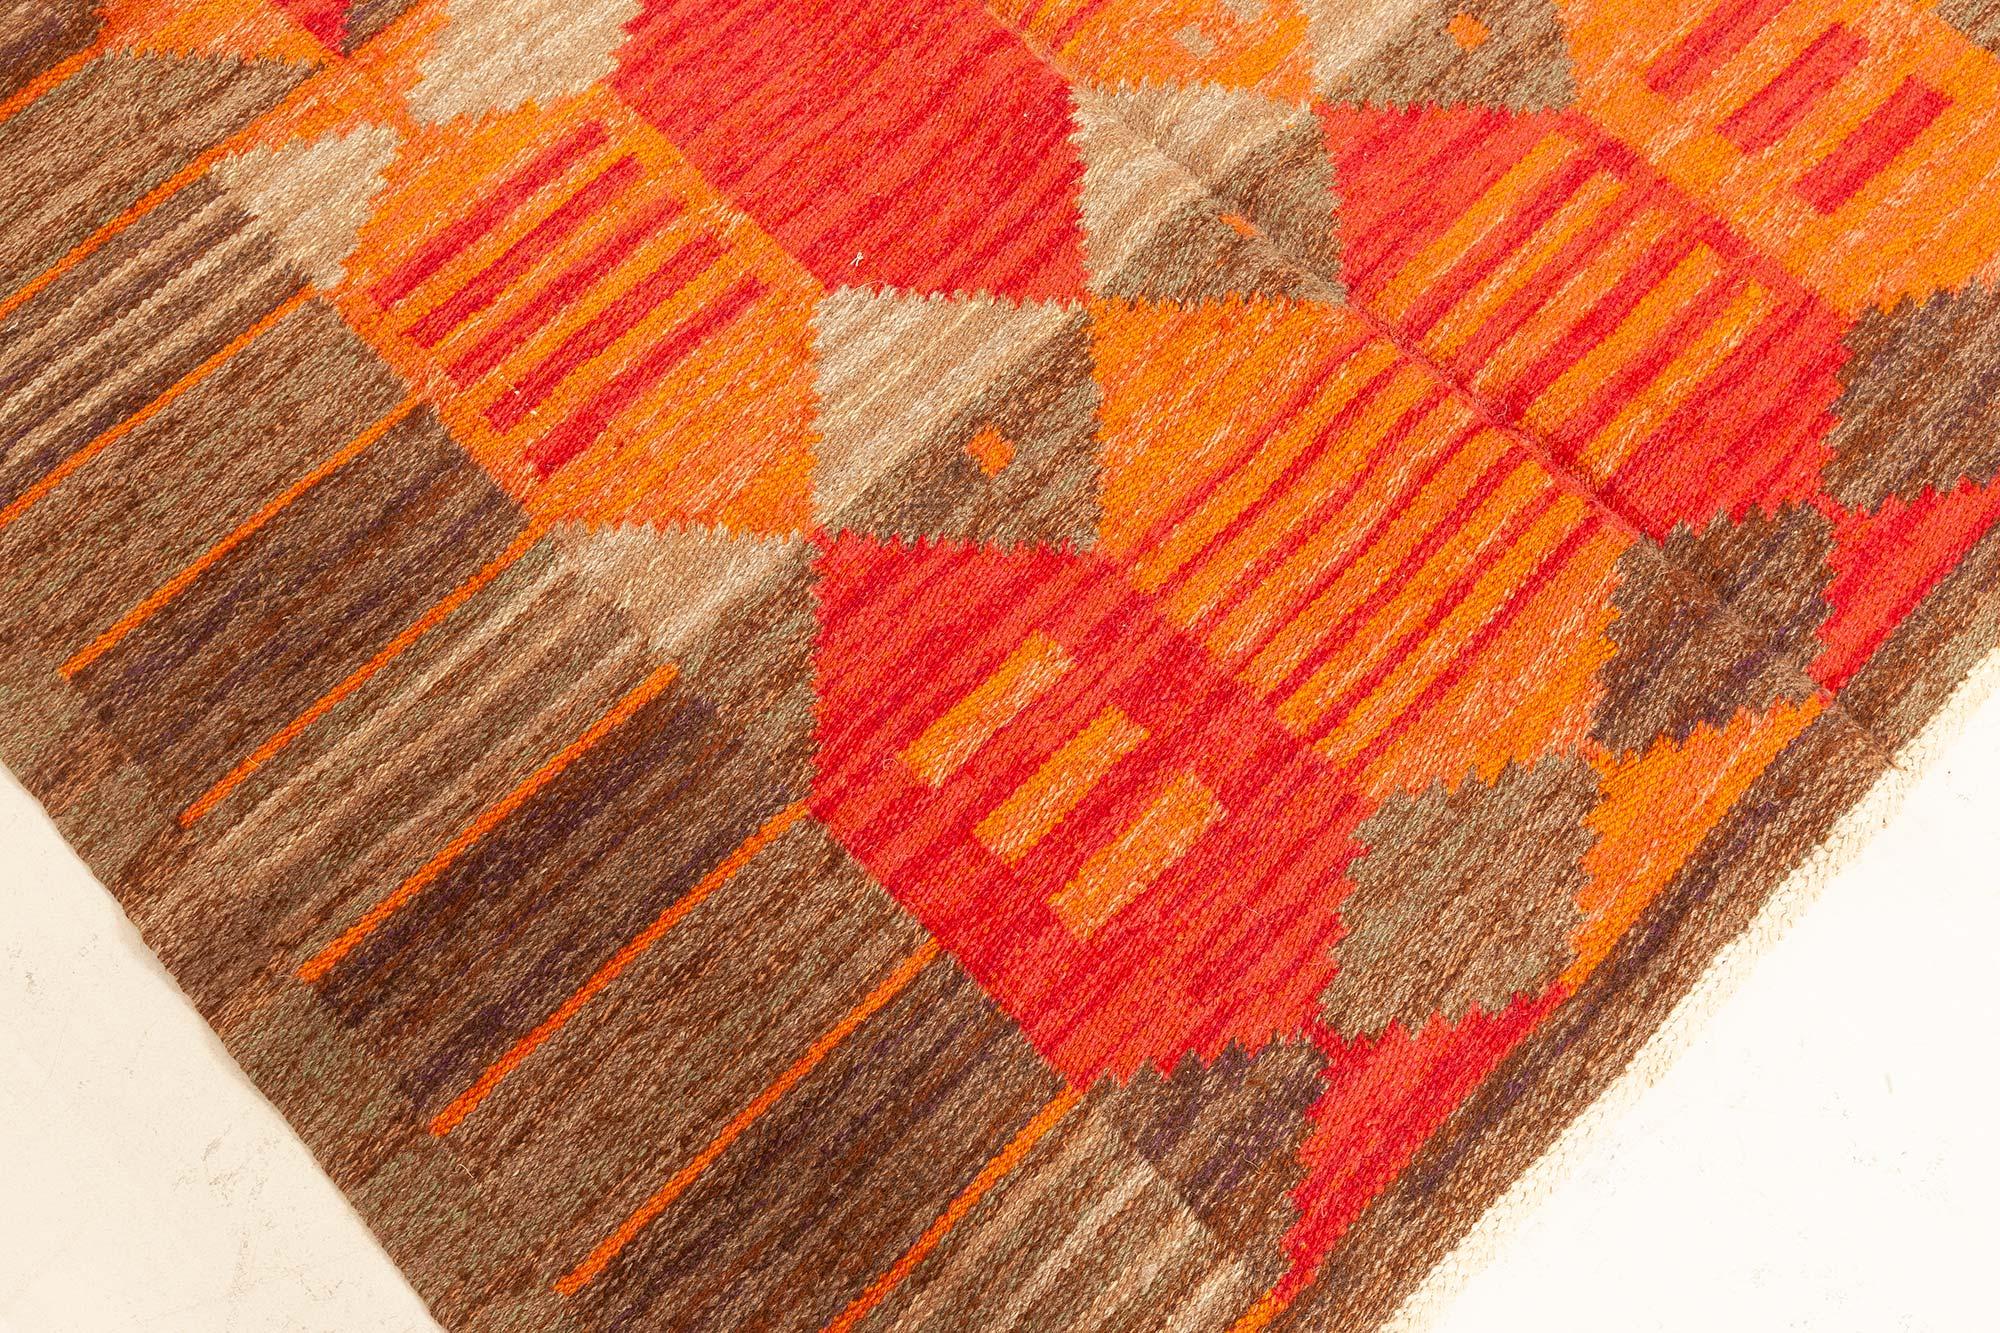 Midcentury Swedish Flat-Woven Rug by Karin Jönsson In Good Condition For Sale In New York, NY